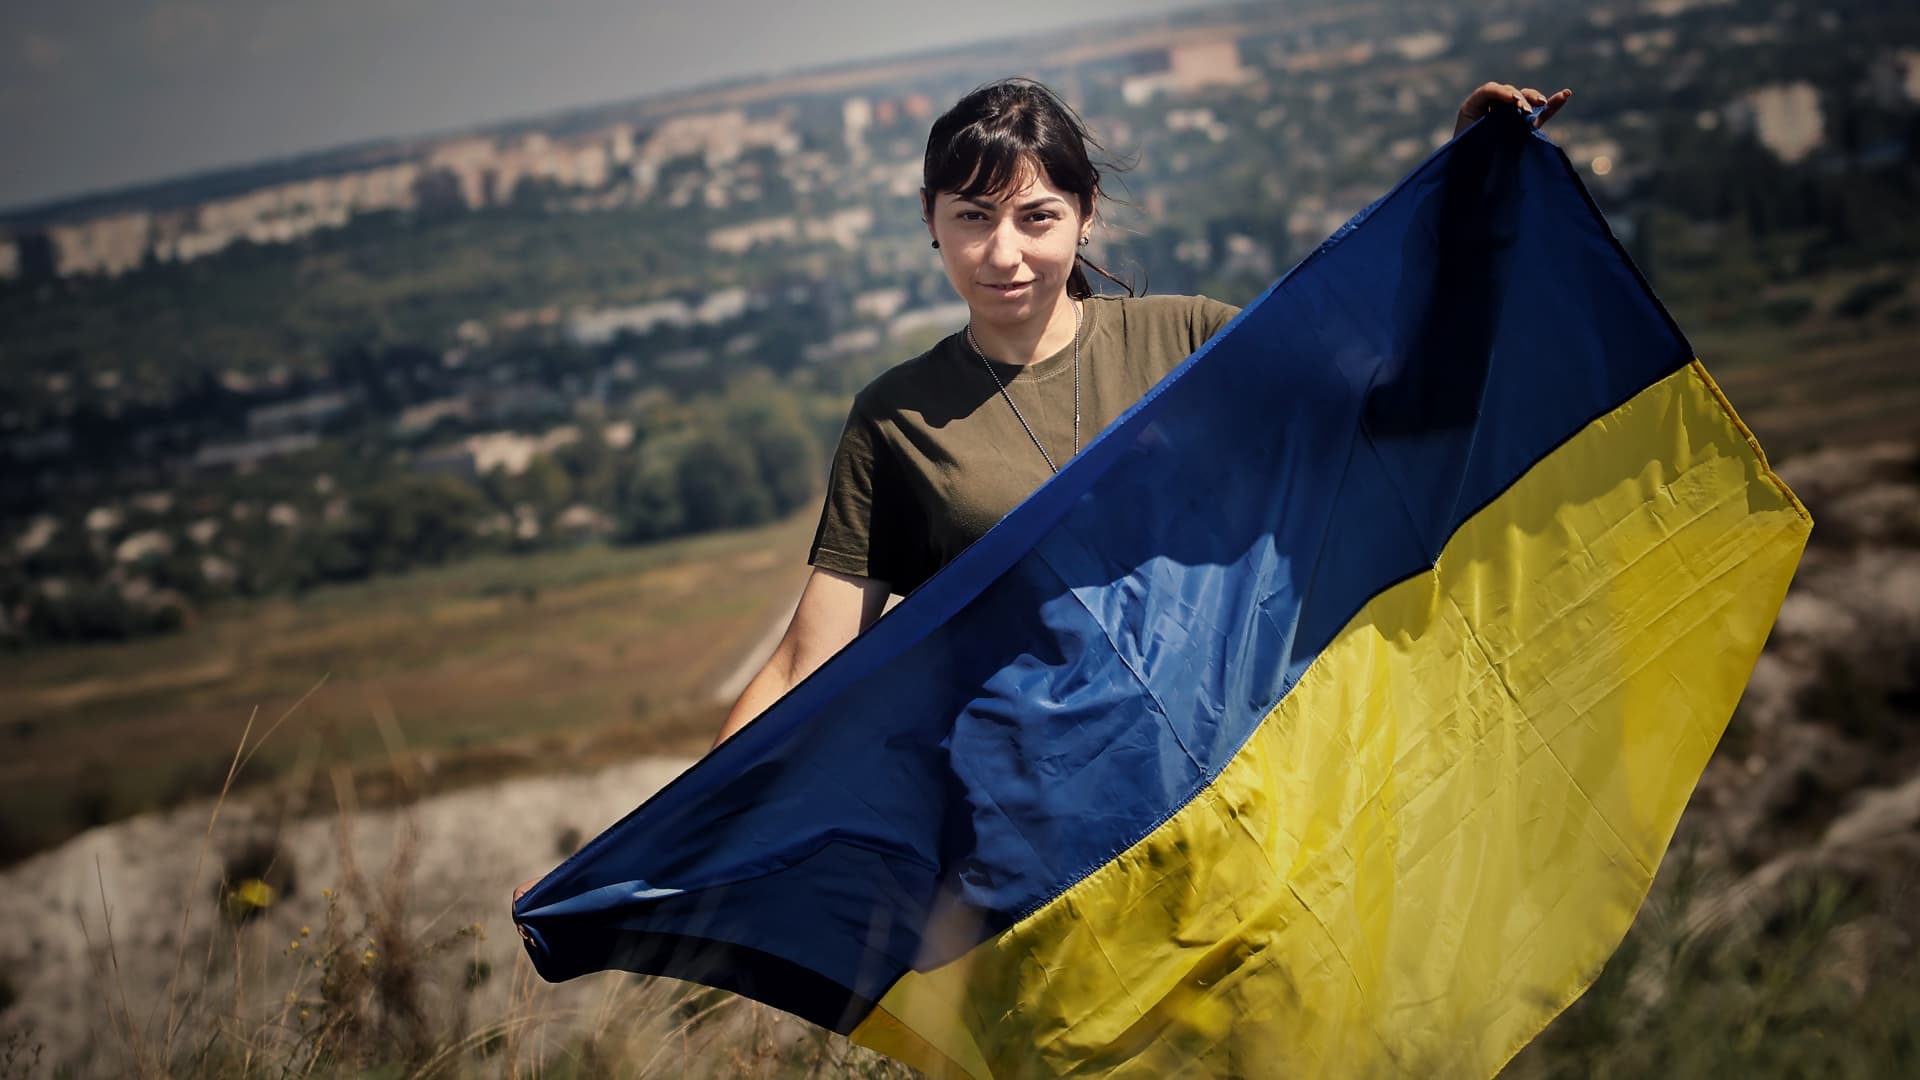 KRAMATORSK, UKRAINE – AUGUST 22: Ukrainian soldier pose for a photo with the flag of Ukraine on August 22, 2023 in Kramatorsk, Ukraine. On August 23, Ukraine celebrates Day of the National Flag and on August 24 its 1991 declaration of independence from the USSR. (Photo by Yan Dobronosov/Global Images Ukraine via Getty Images)